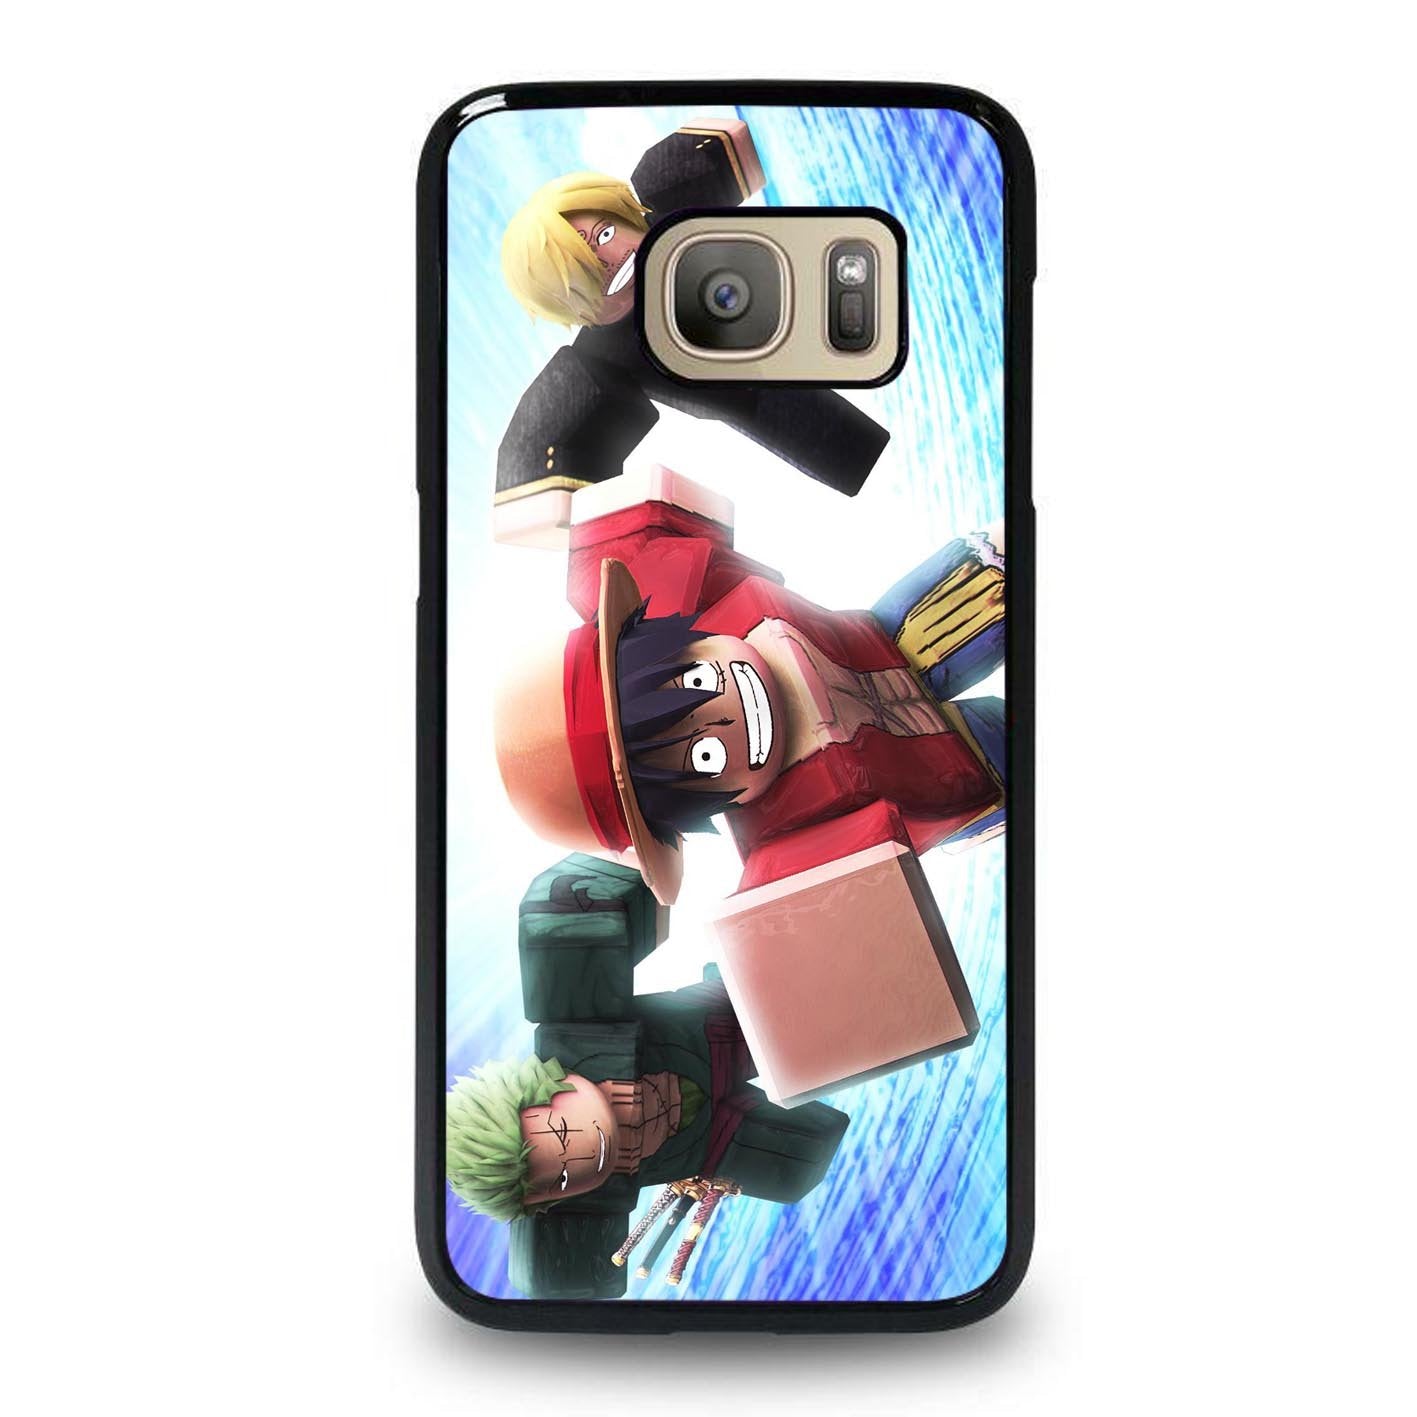 Roblox Artwork 06 Samsung Galaxy S7 Case Samsung And Android Teecustom - roblox iphone 6s cover pop socket